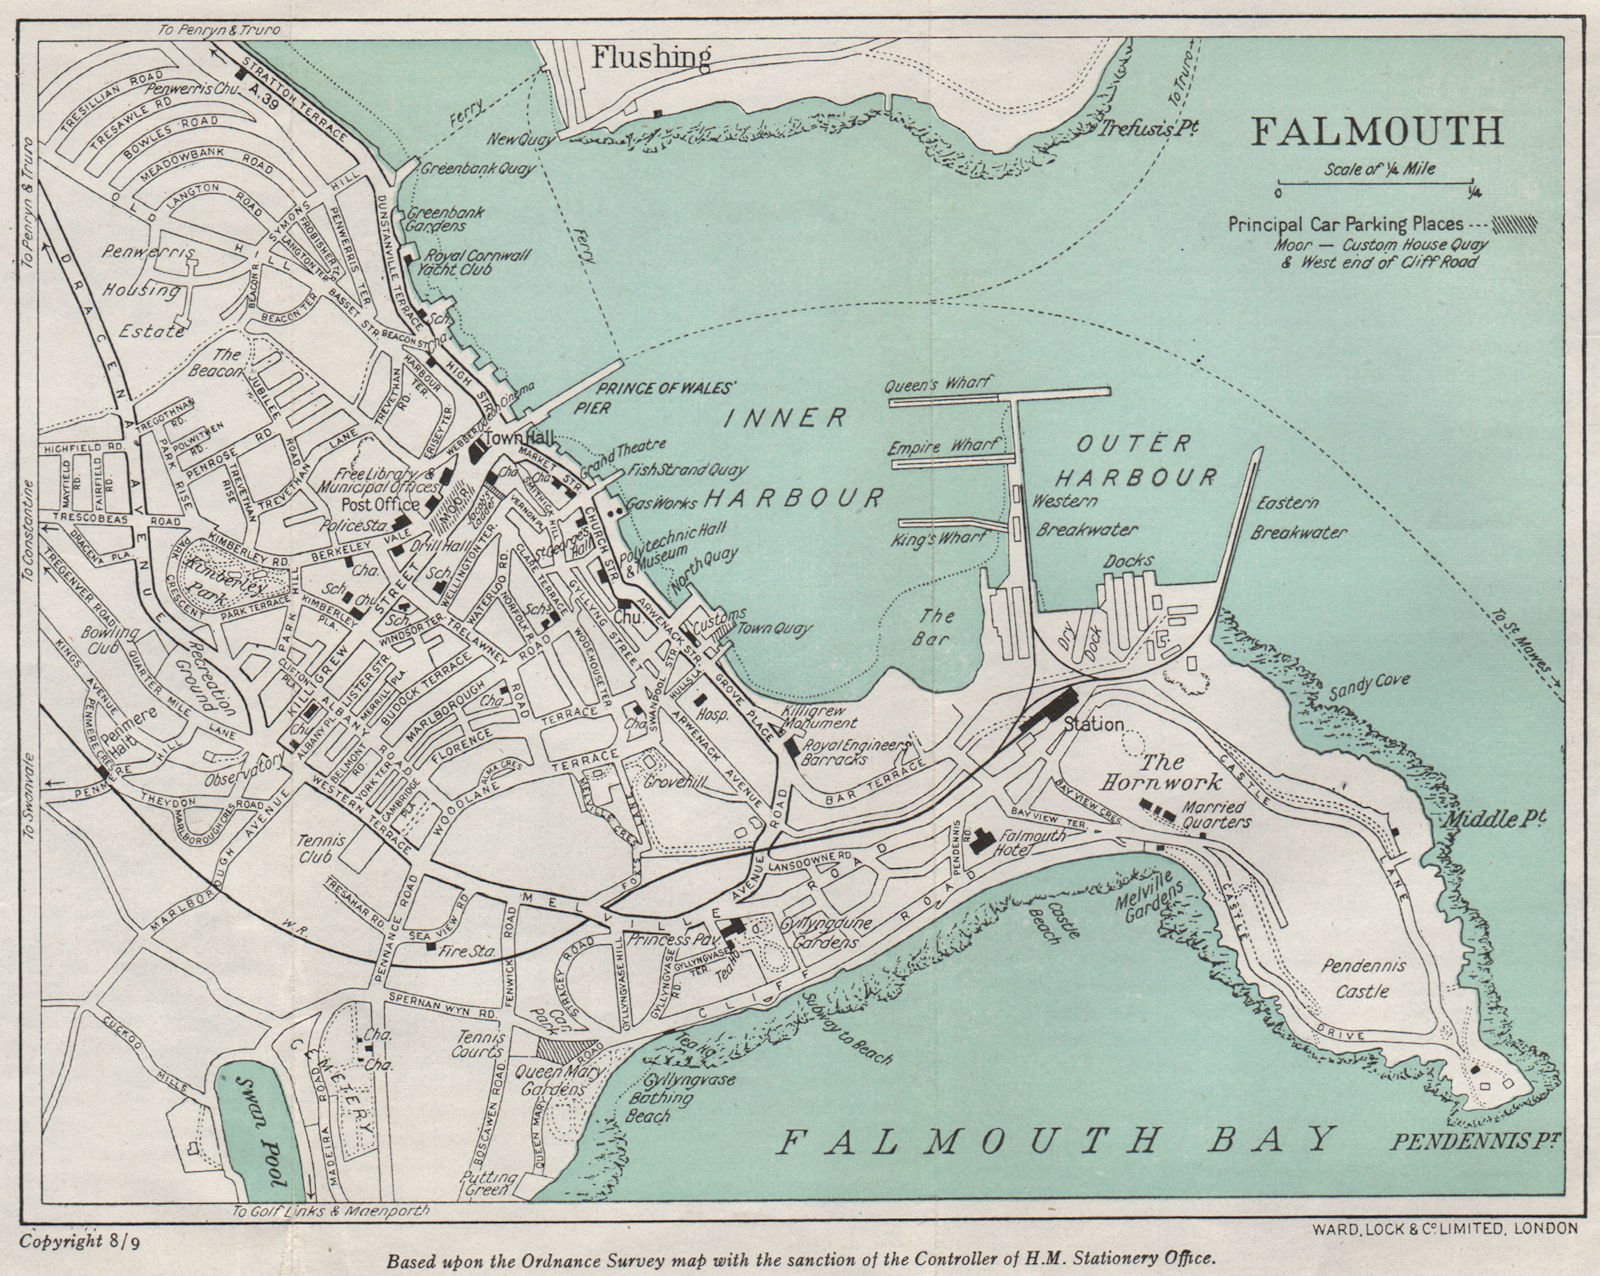 Associate Product FALMOUTH vintage city/town plan. Cornwall. WARD LOCK 1948 old vintage map